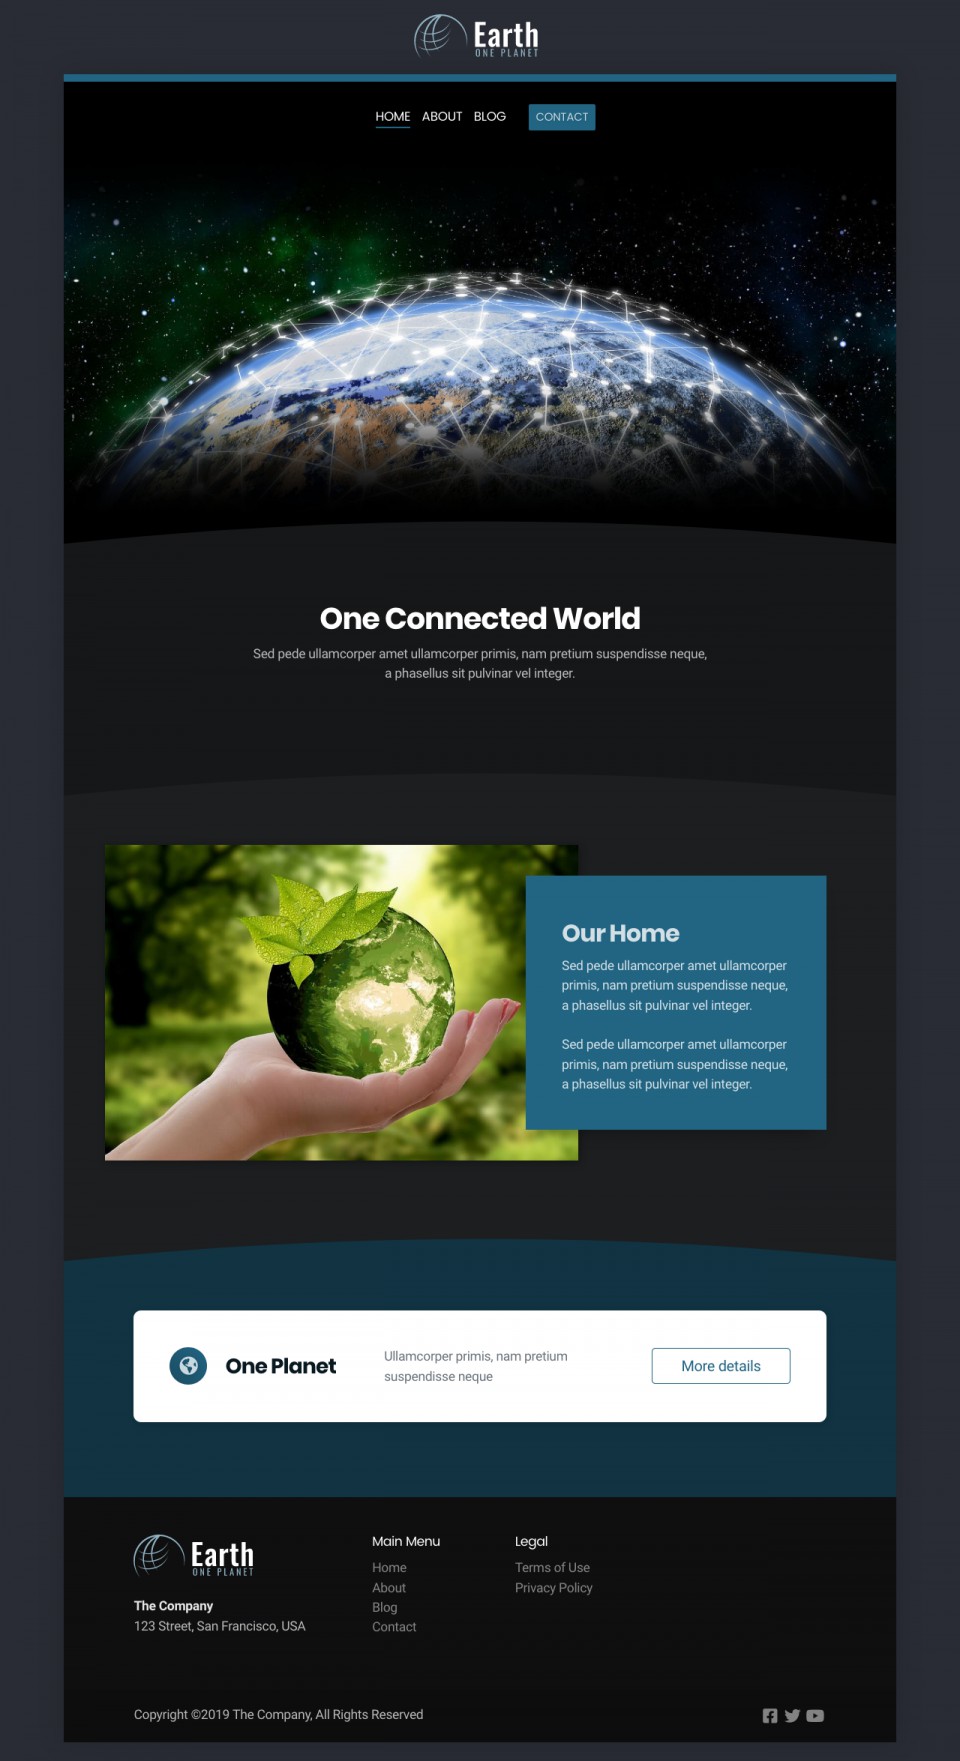 Earth Website Template - Ideal for small business owners, entrepreneurs, and creatives looking to establish a professional online presence.